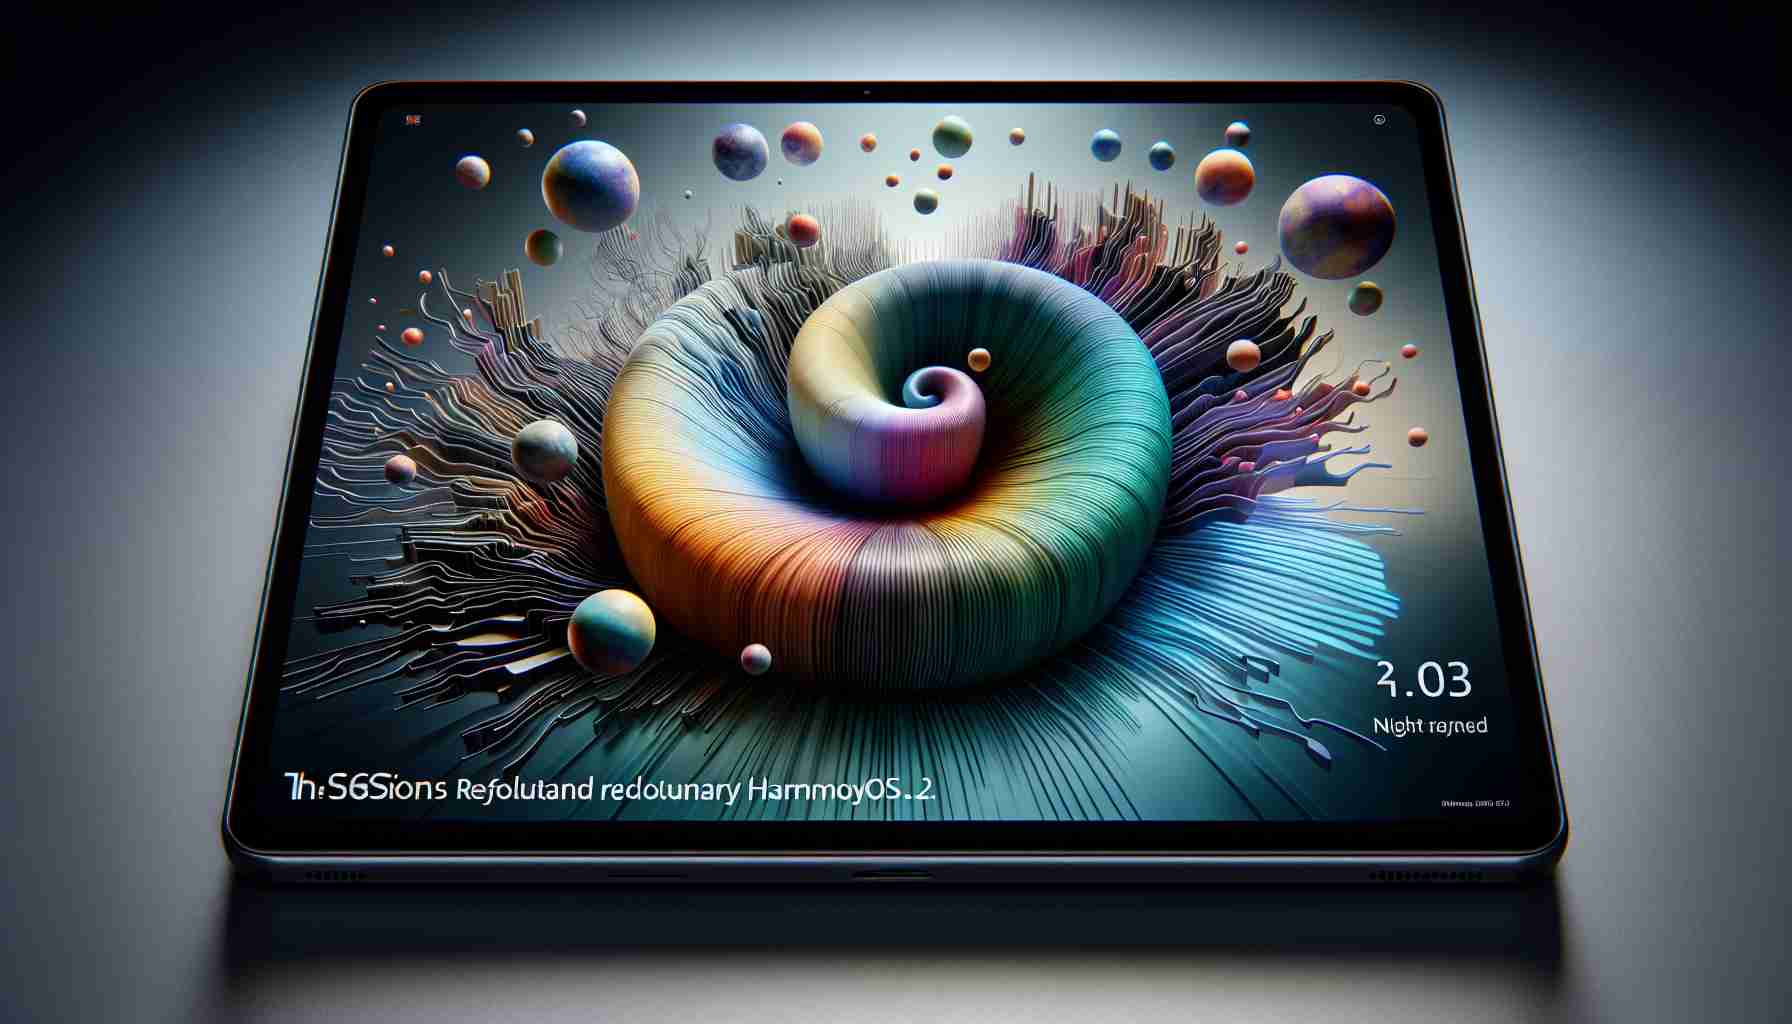 Revolutionary HarmonyOS 4.2 Transformation Unleashed for the Huawei MatePad Professional 10.8 2021